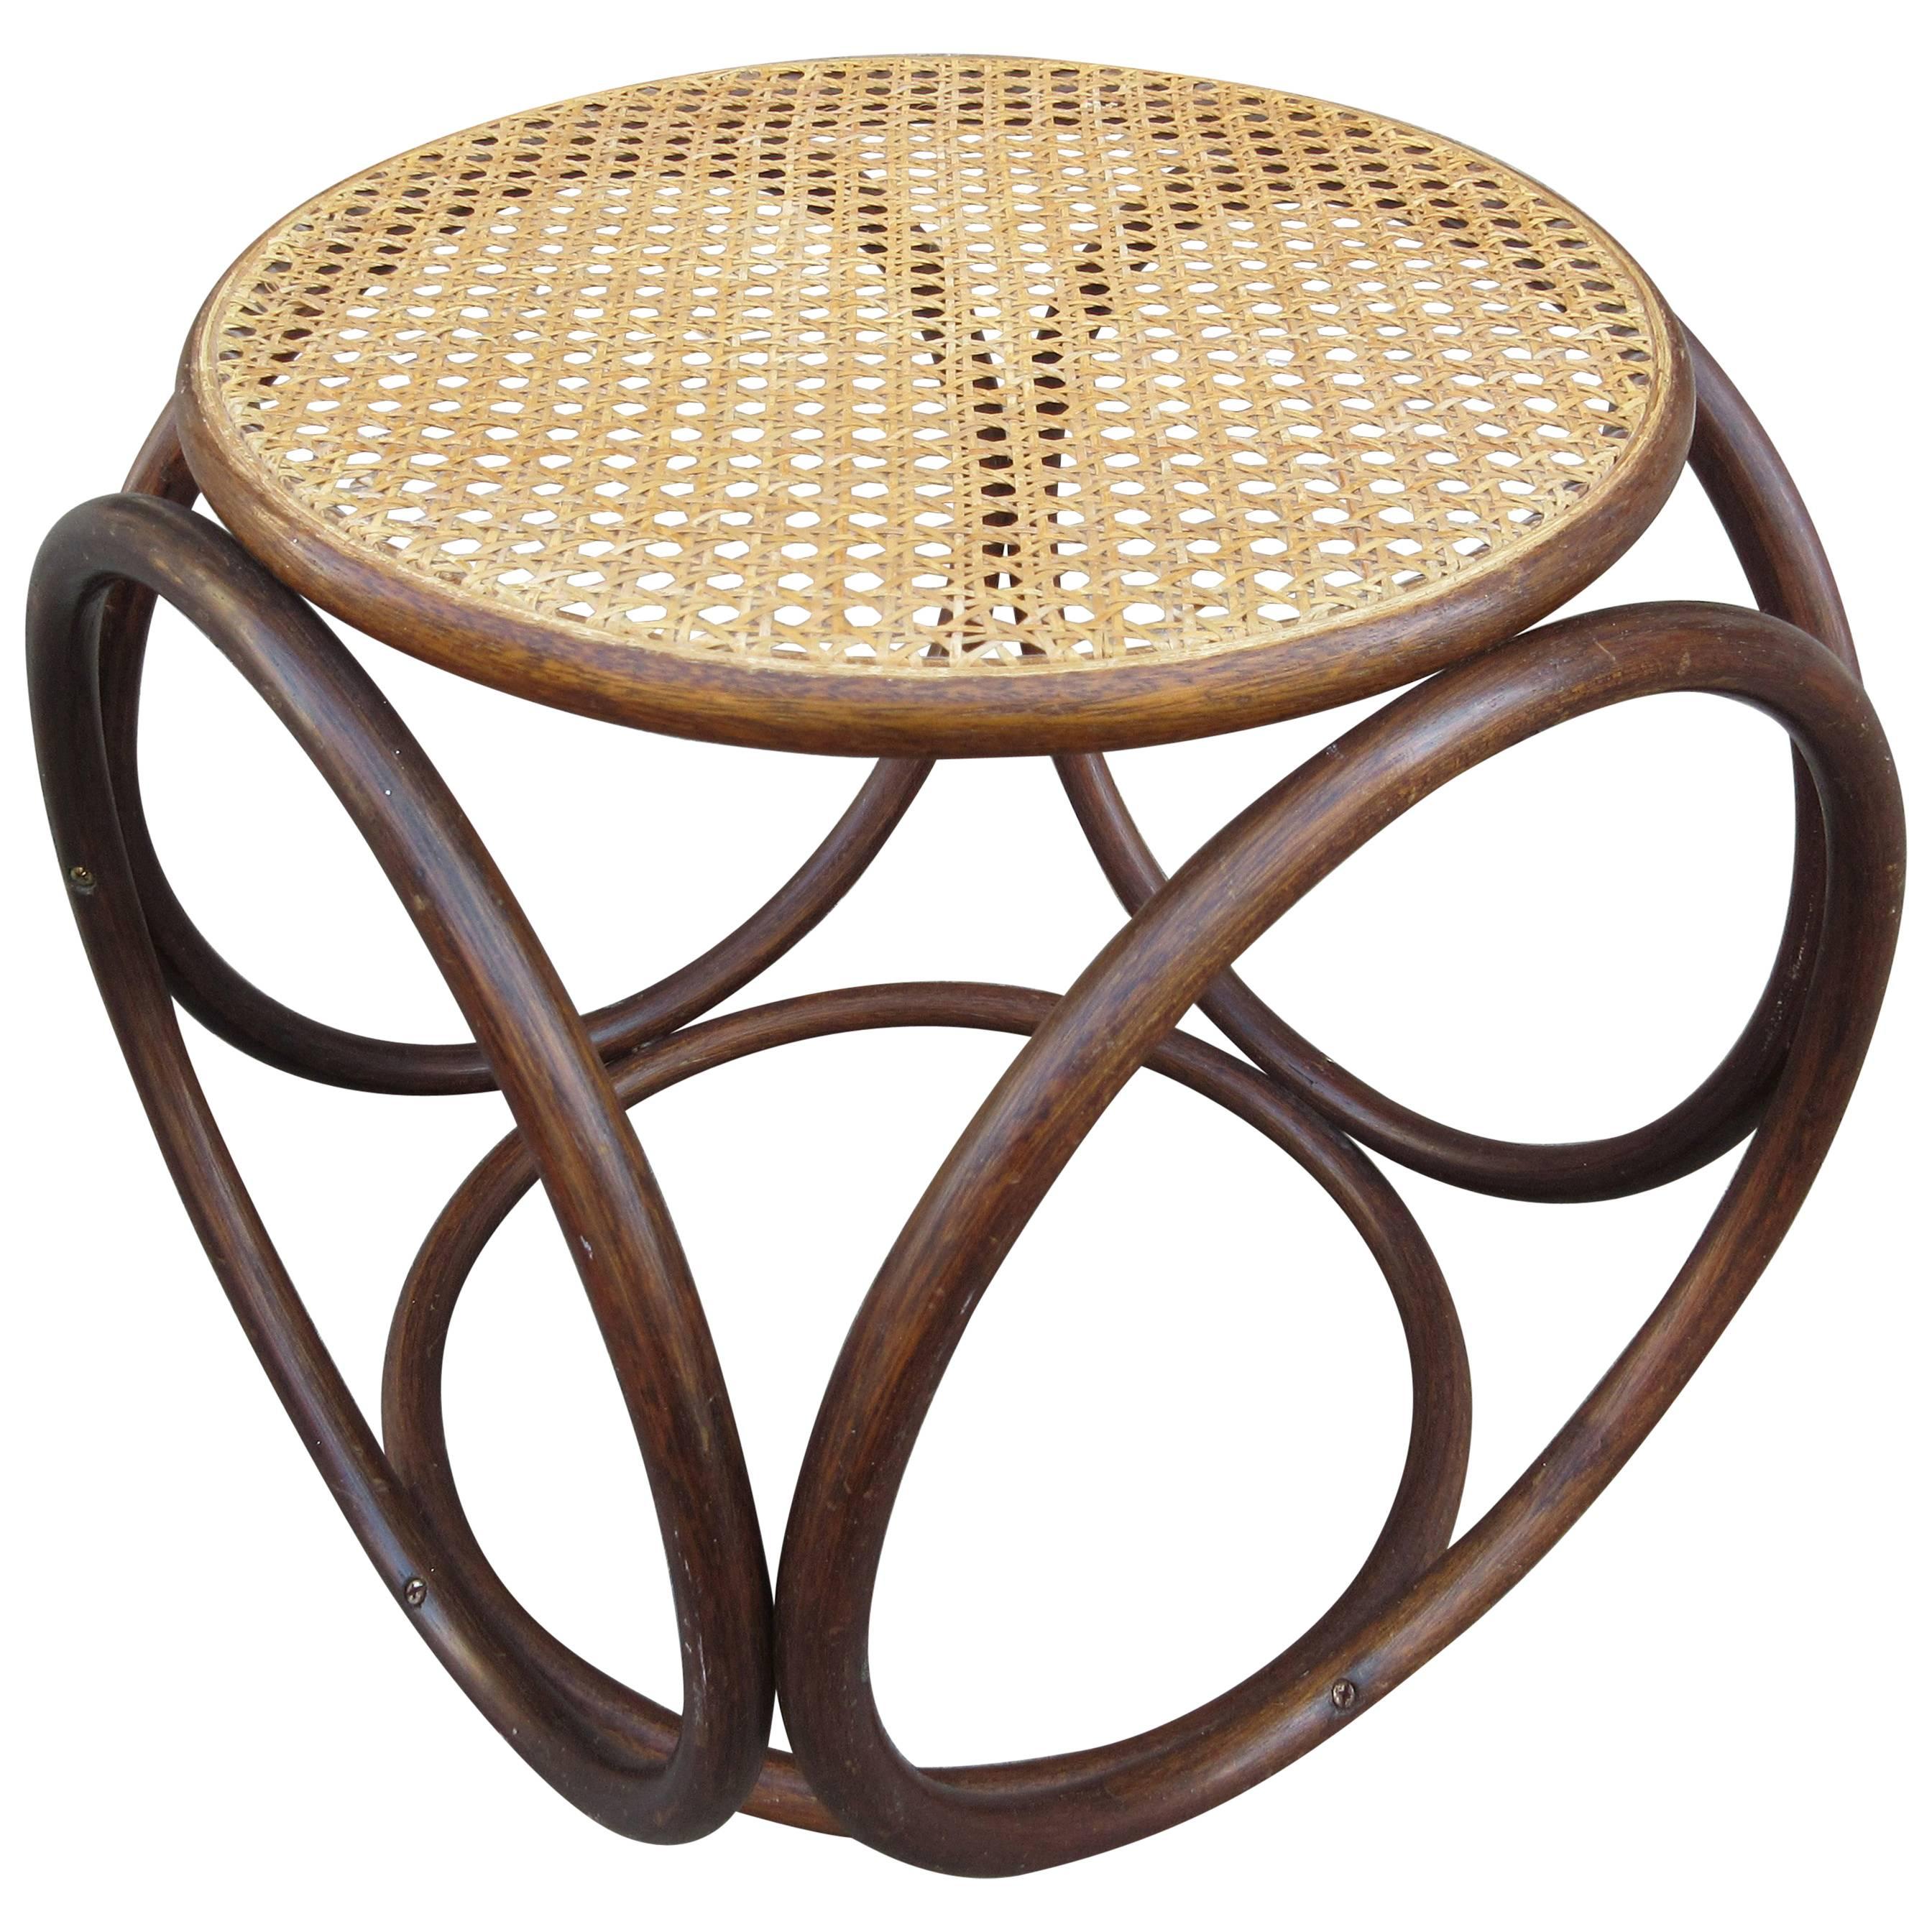 Thonet Bentwood and Caned Ottoman or Stool